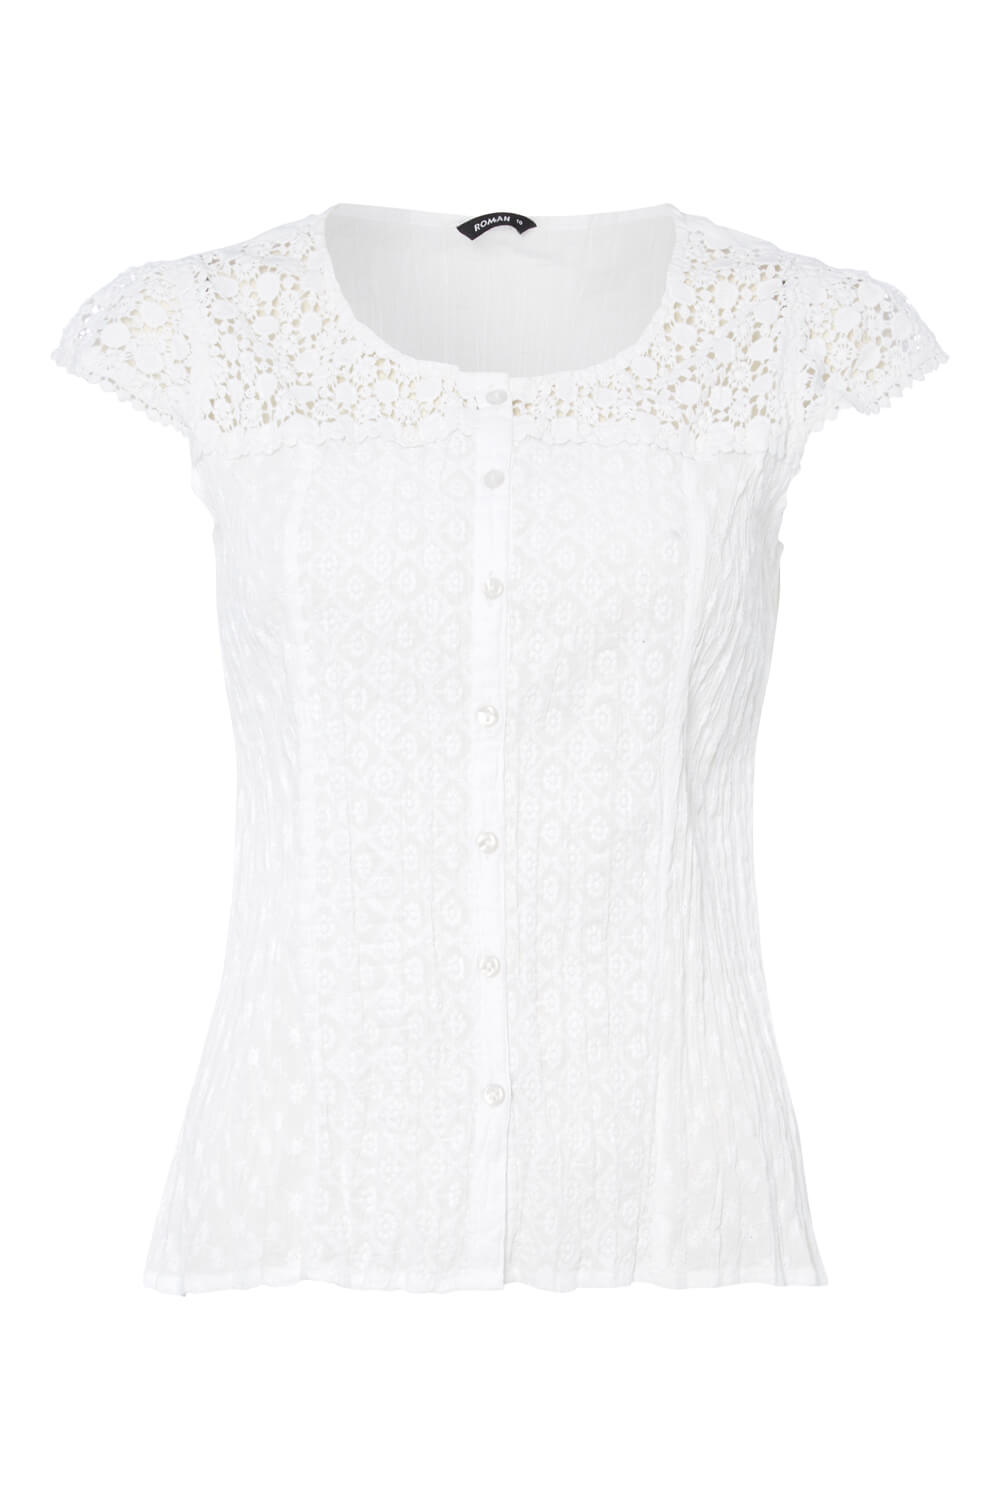 Lace Yoke and Sleeve Crinkle Blouse in WHITE - Roman Originals UK